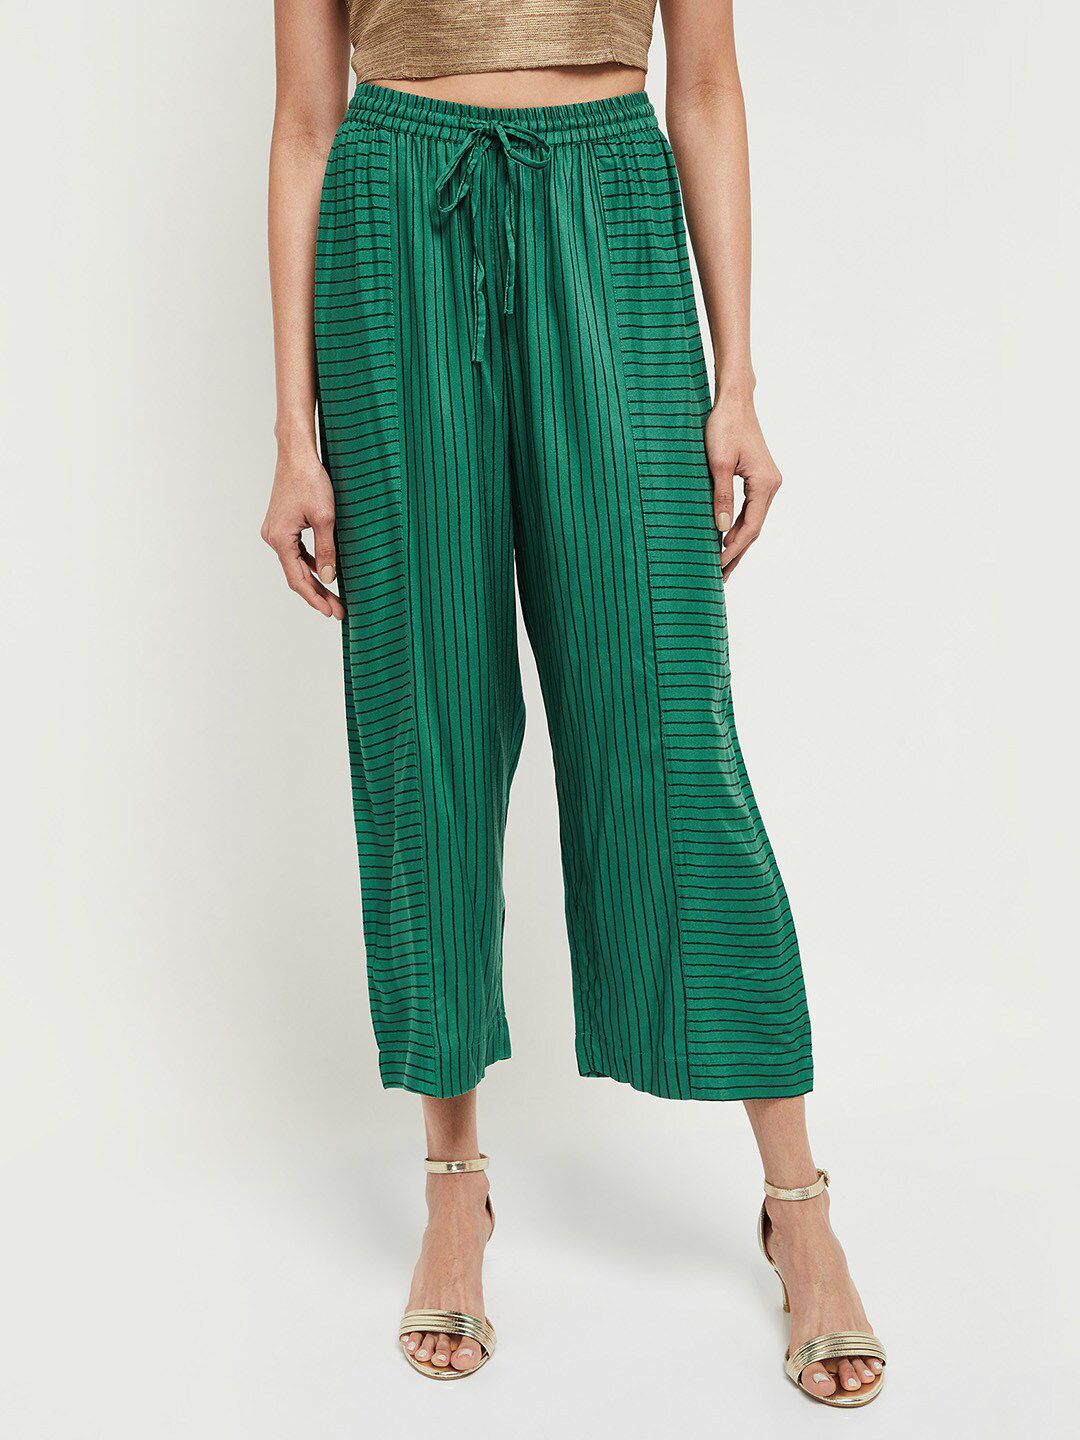 max Women Green & Black Checked Cropped Ethnic Palazzos Price in India